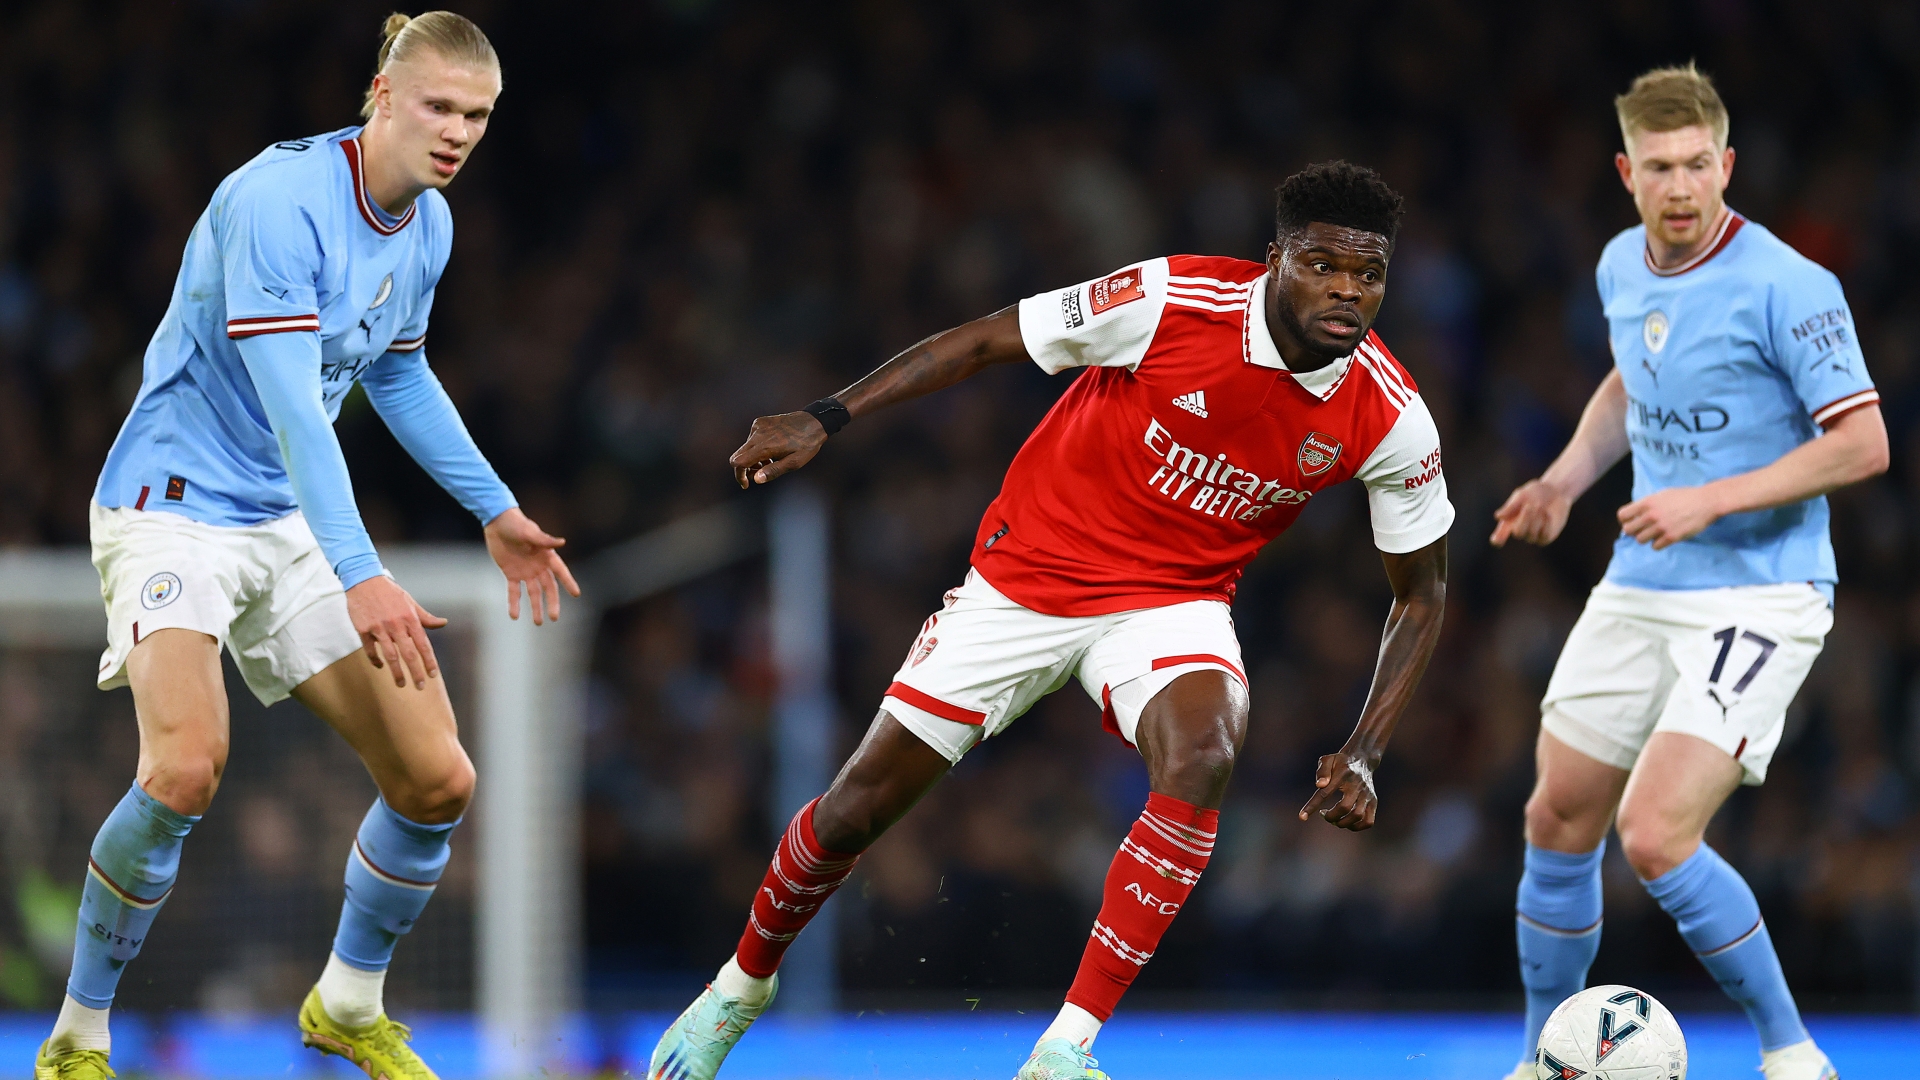 Is Thomas Partey fit to face Aston Villa? Arsenal midfielder absent from Manchester City defeat and set to be assessed ahead of Villa Park clash